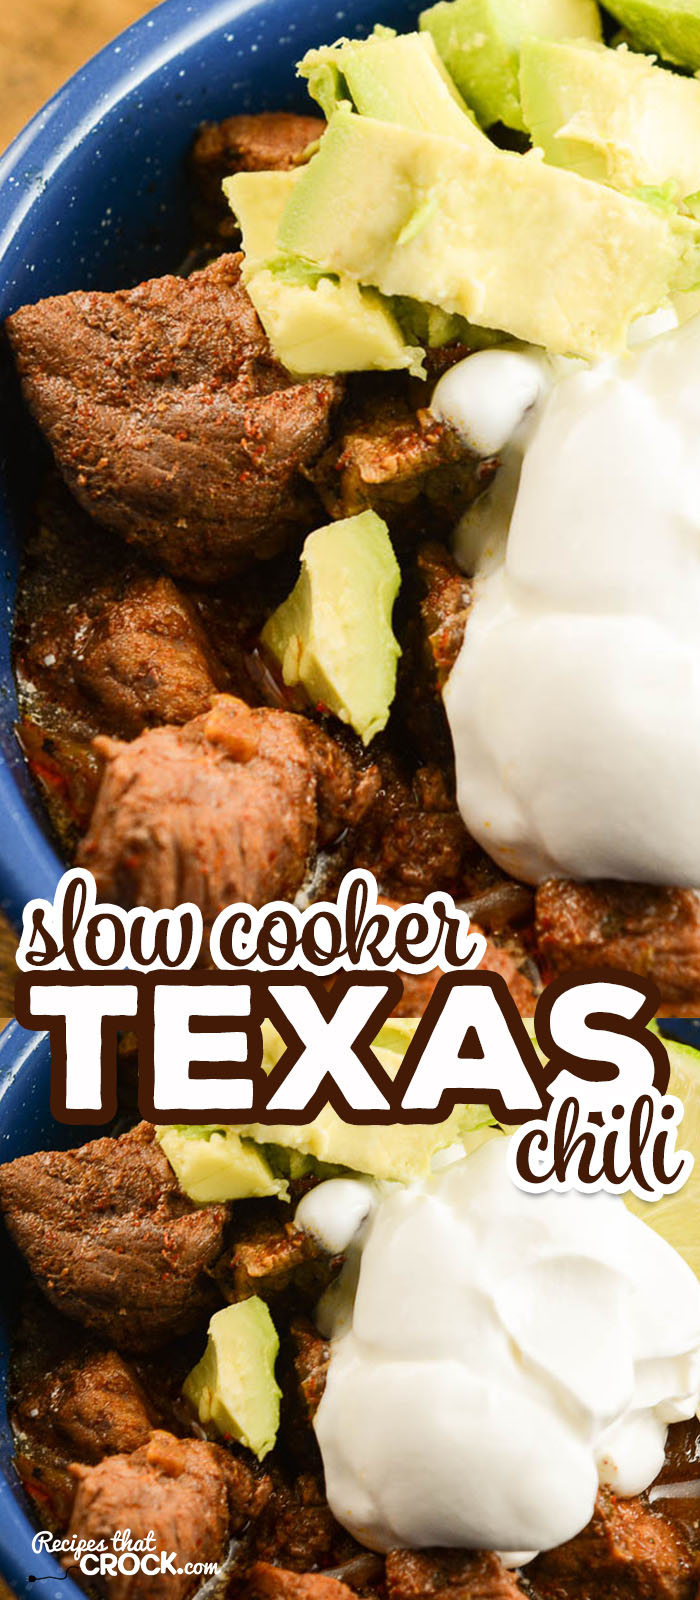 Are you looking for a yummy crock pot texas-style chili? Our Slow Cooker Texas Chili is a great low carb chili recipe for your crock pot!